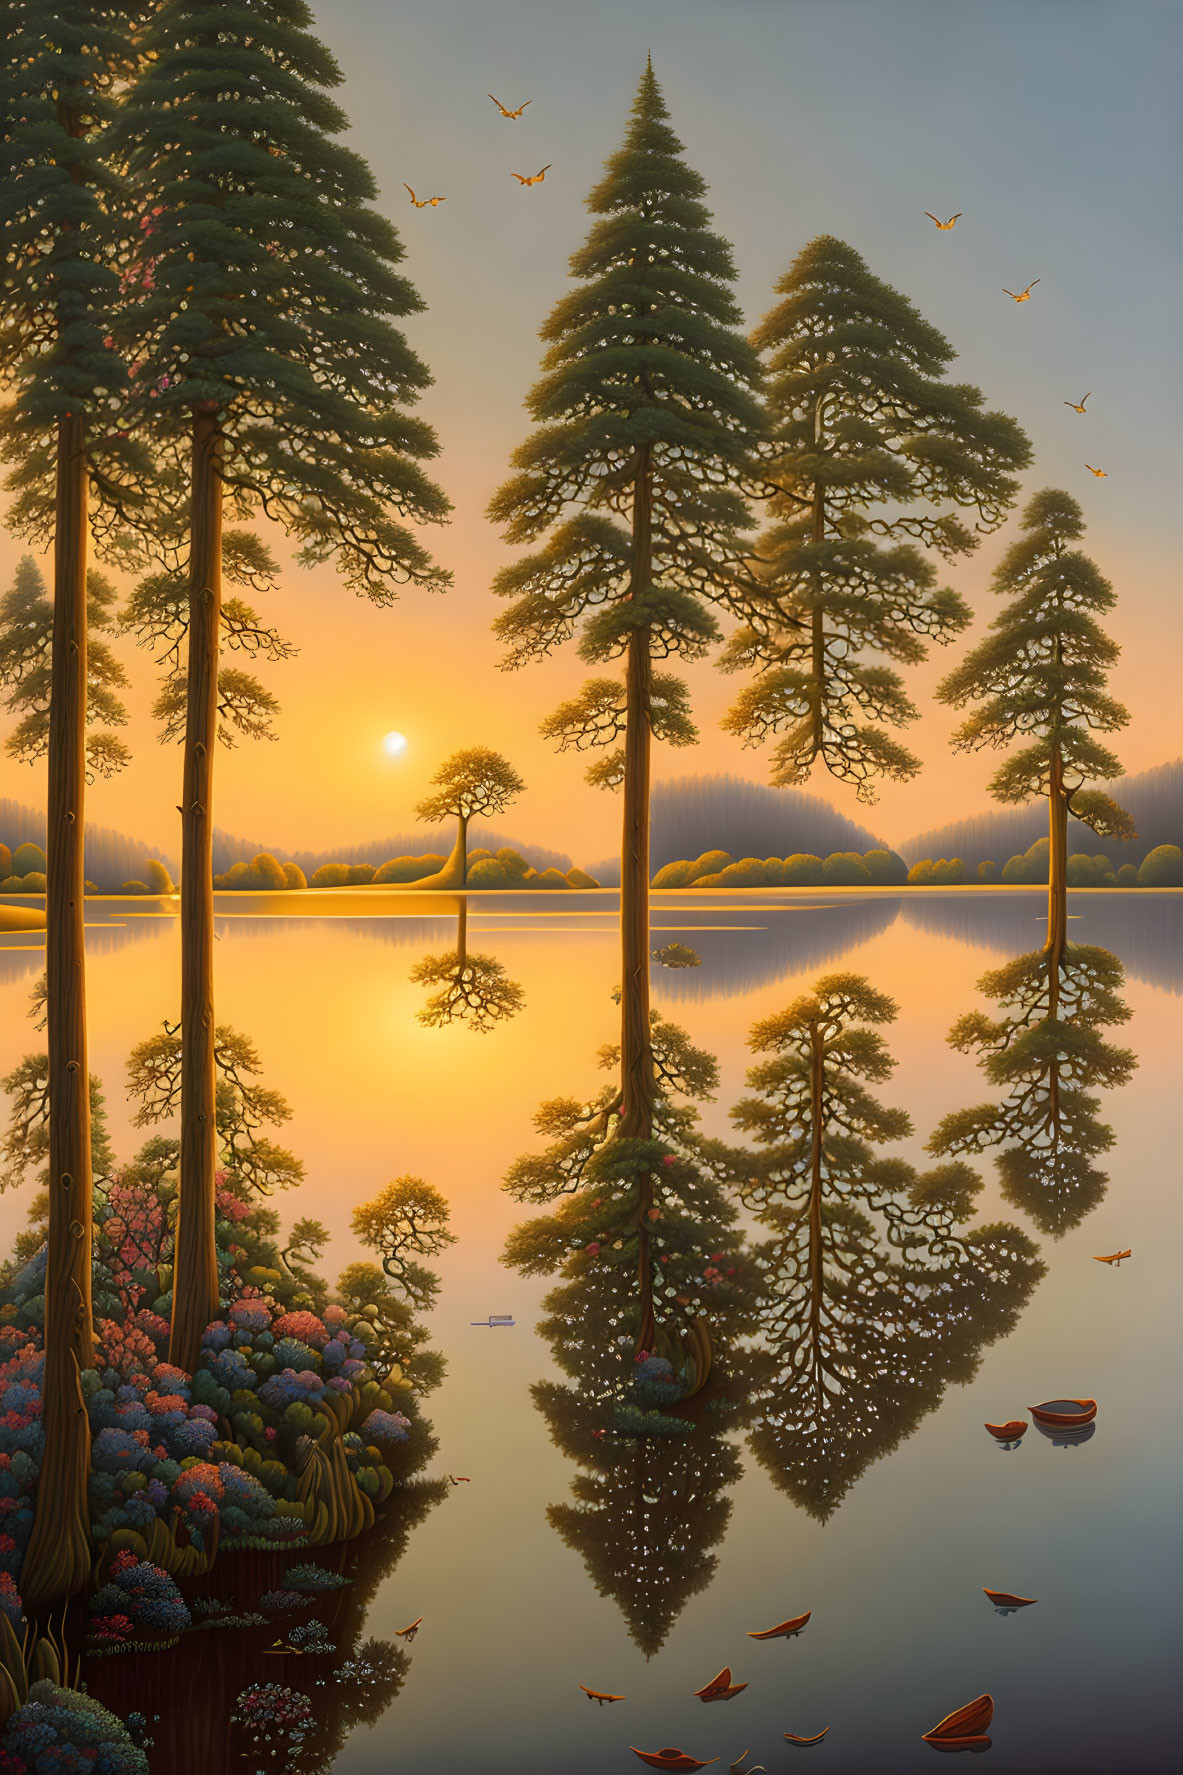 Tranquil sunset scene: lake, tall trees, colorful foliage, birds.